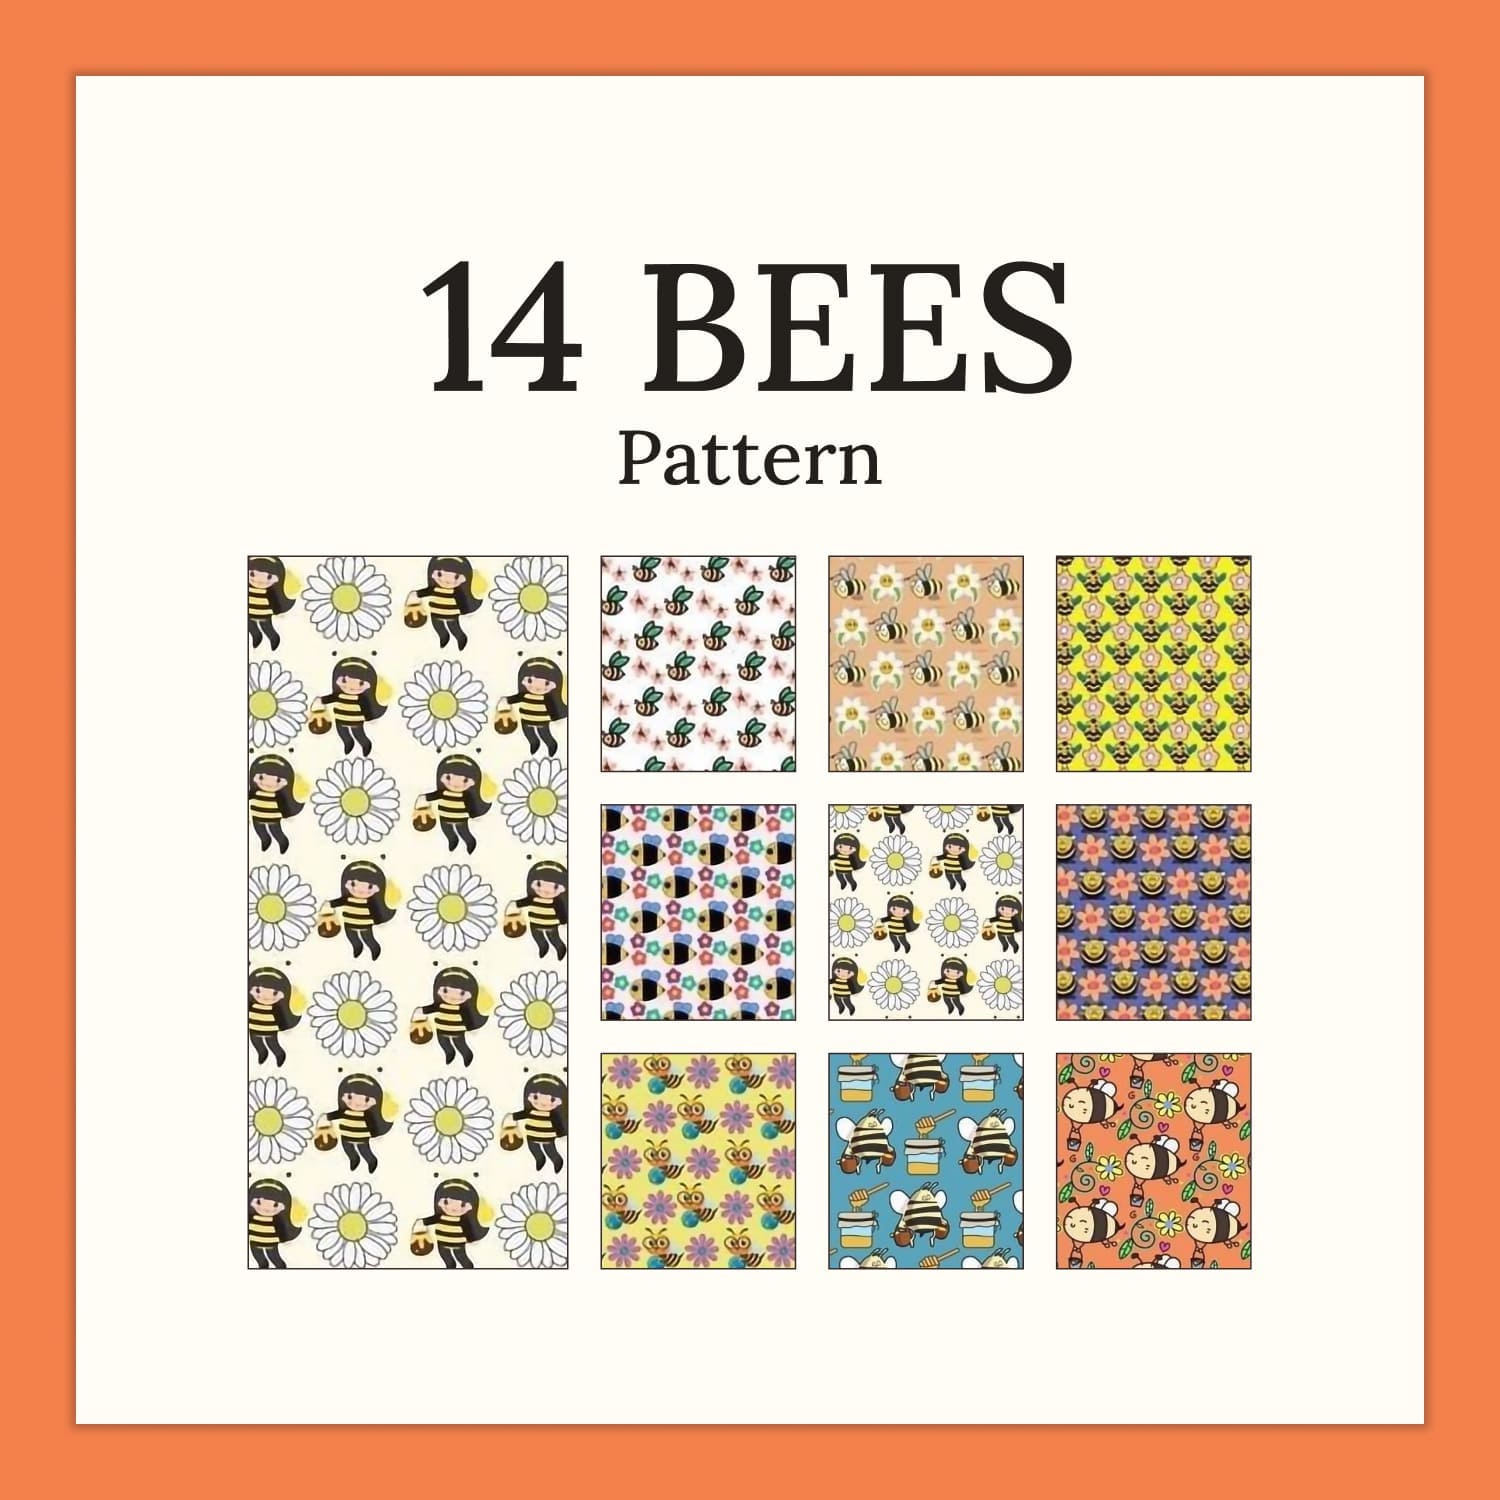 14 Bees Pattern.